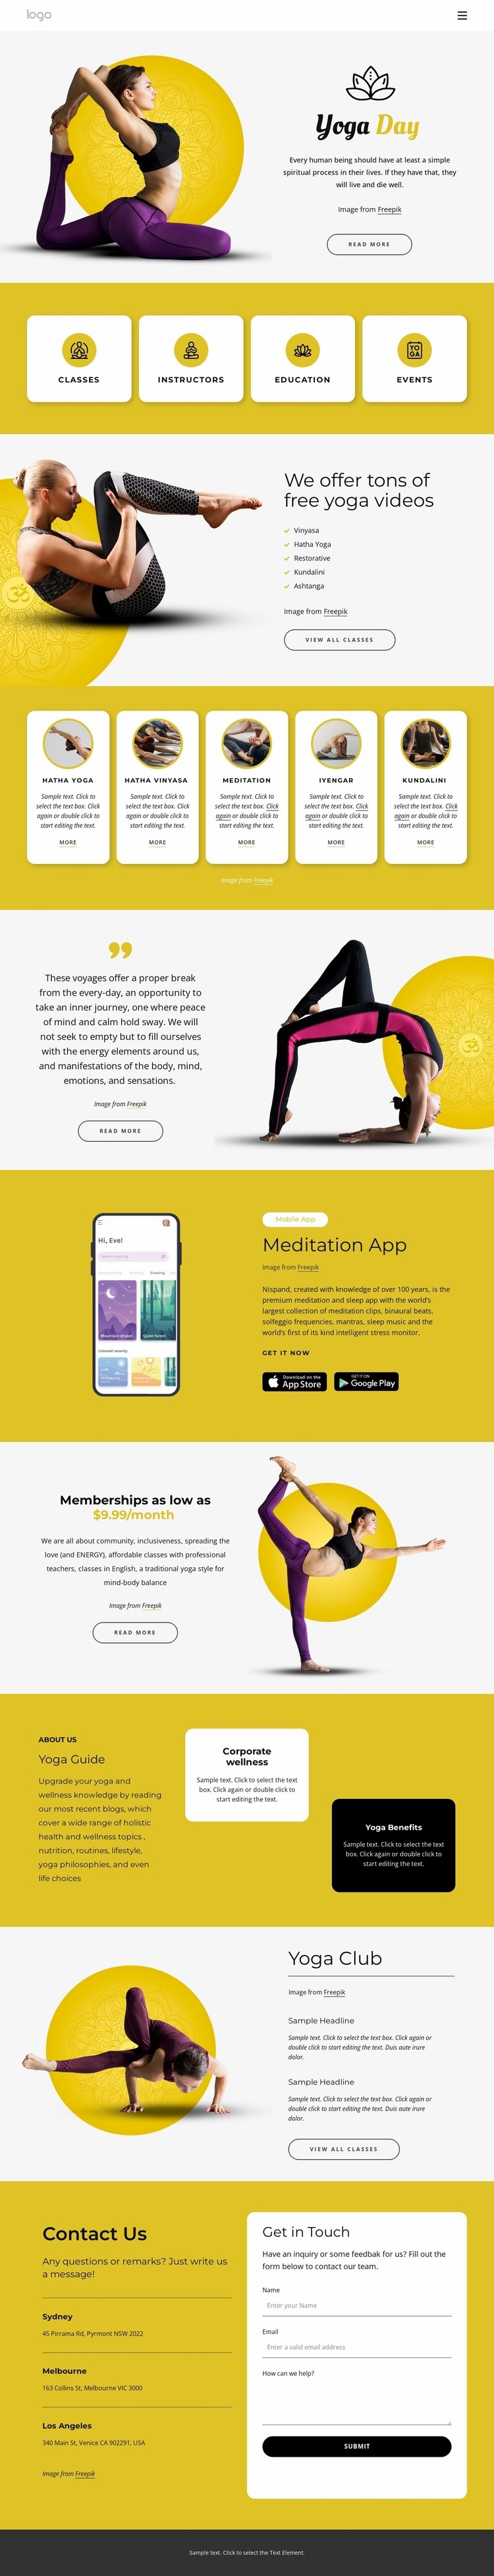 Yoga events and classes Homepage Design